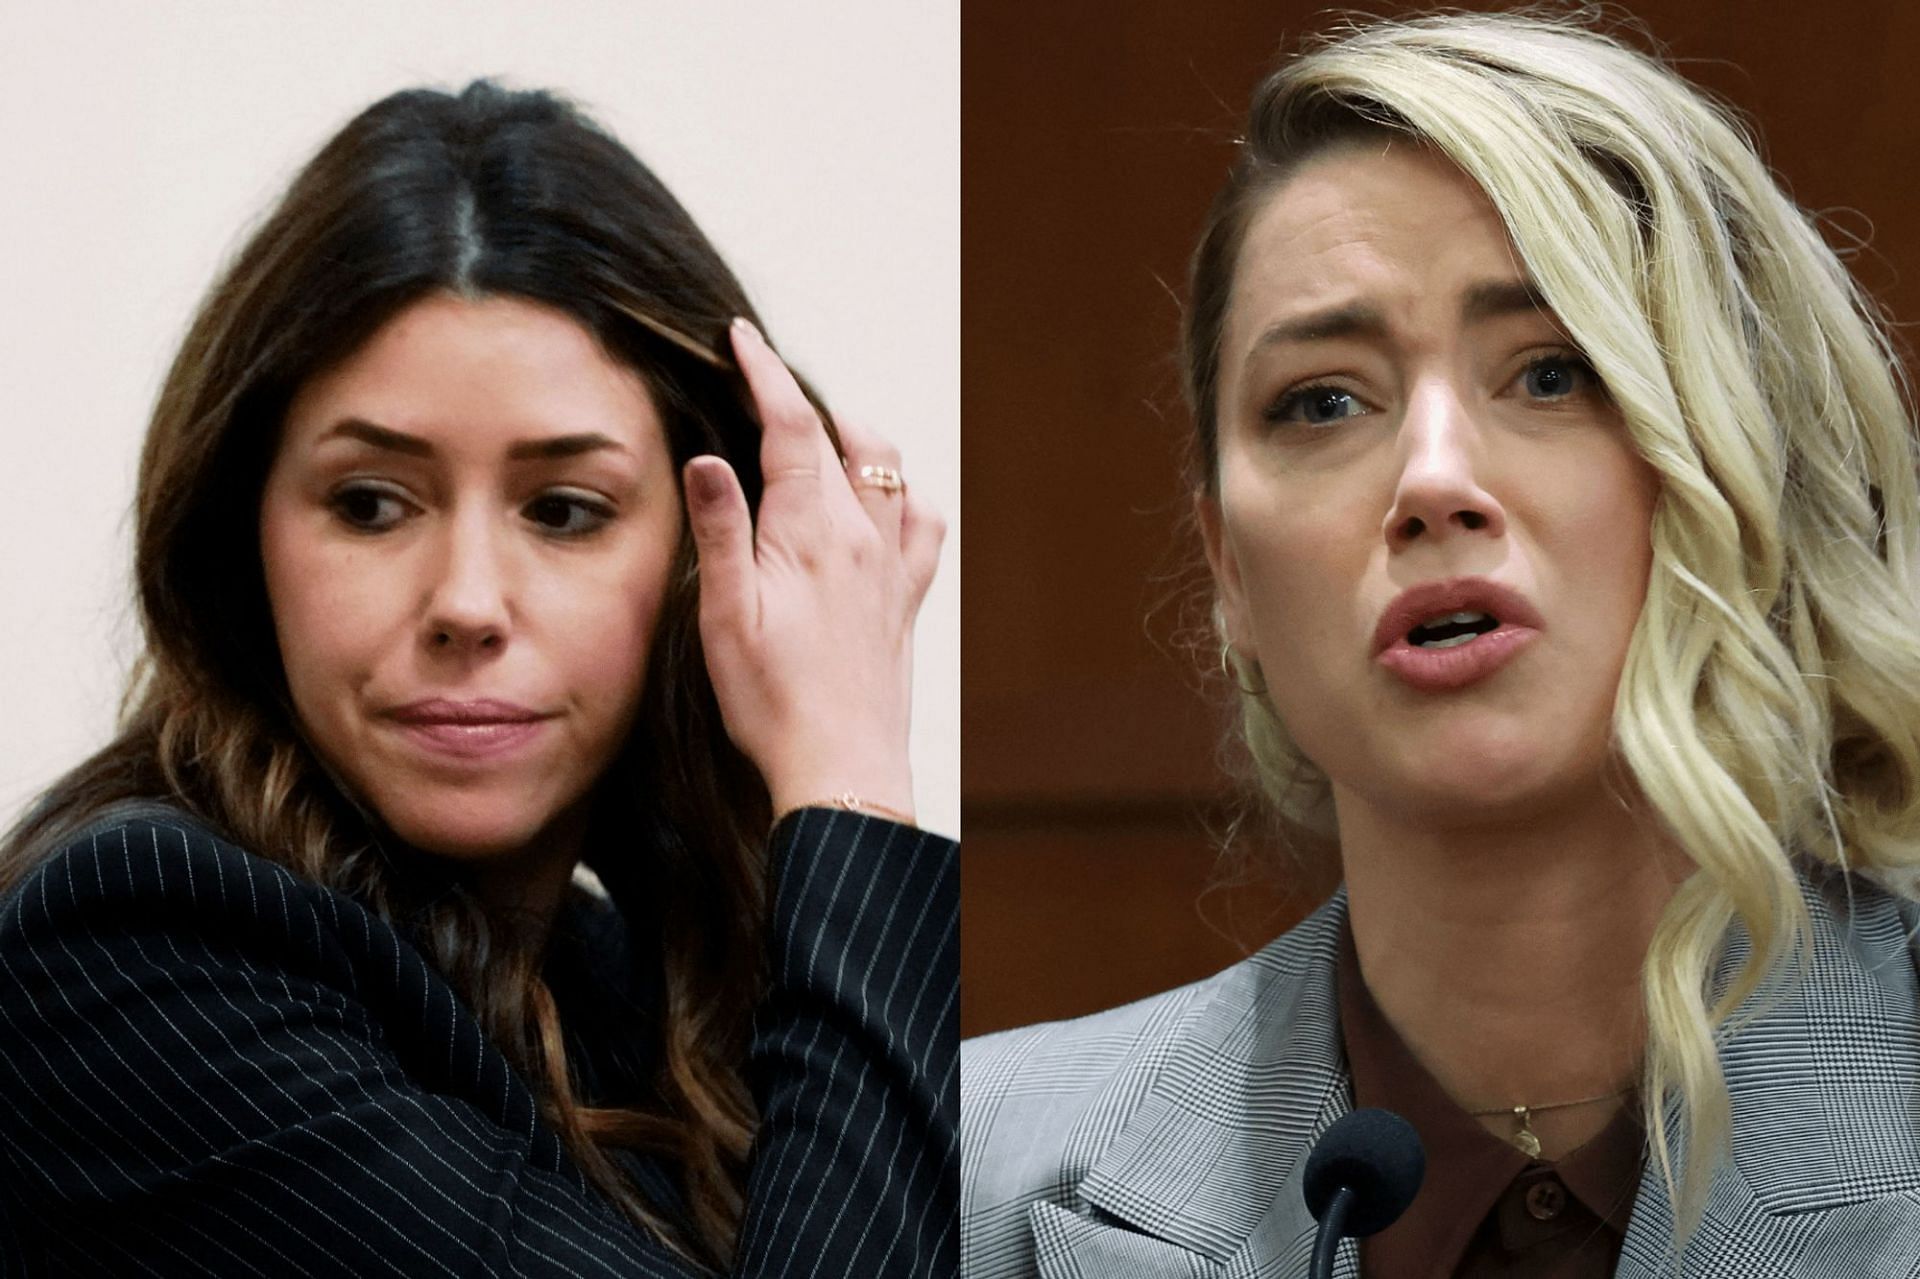 Camille Vasquez&#039;s closing argument against Amber Heard gains immense traction on social media (Image via Getty Images)